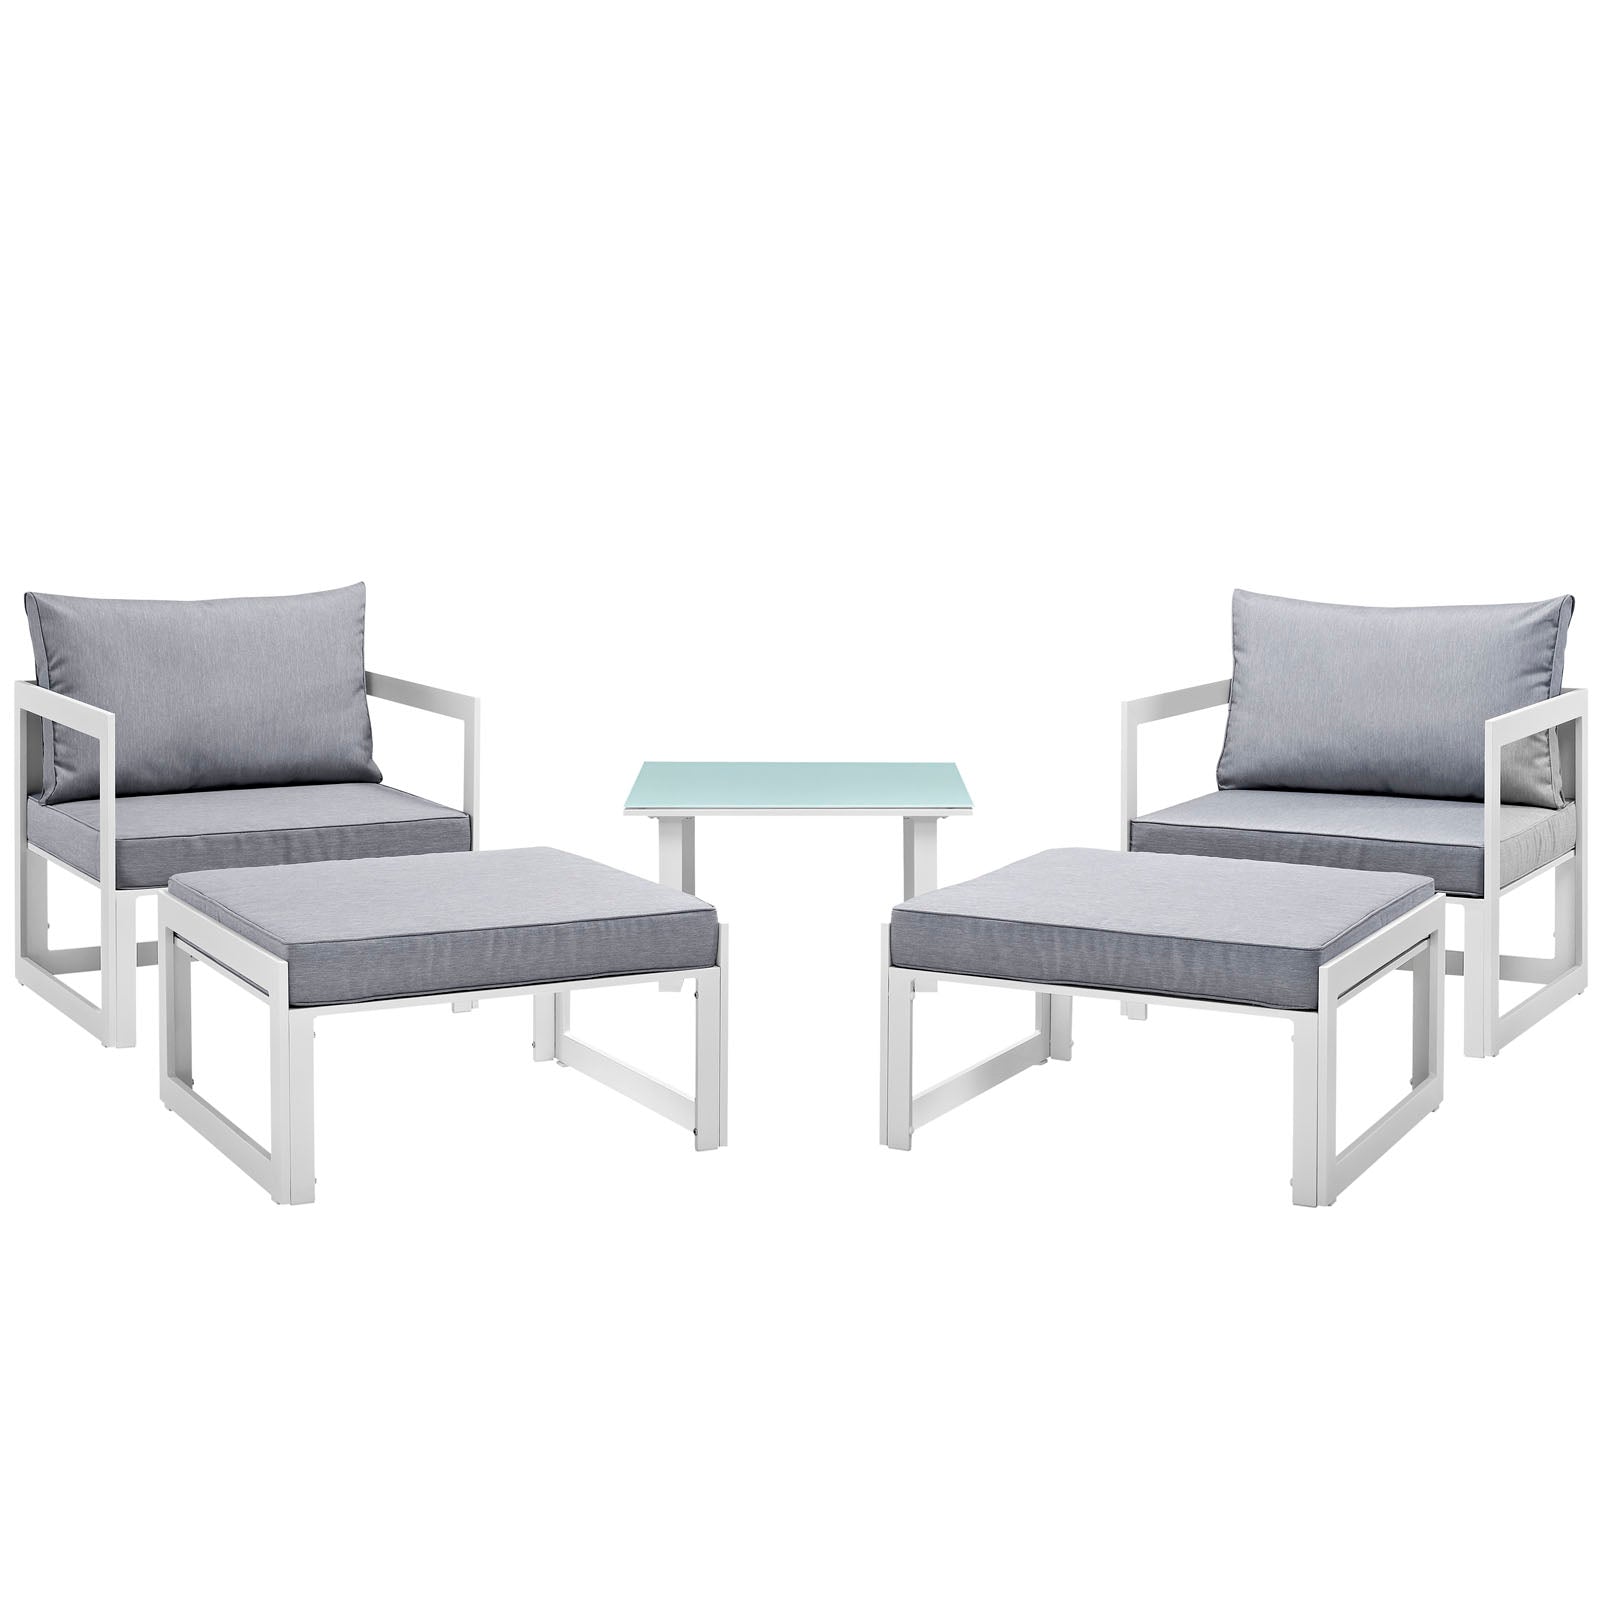 Modway Outdoor Conversation Sets - Fortuna 5 Piece Outdoor Patio Sectional Sofa Set White Gray